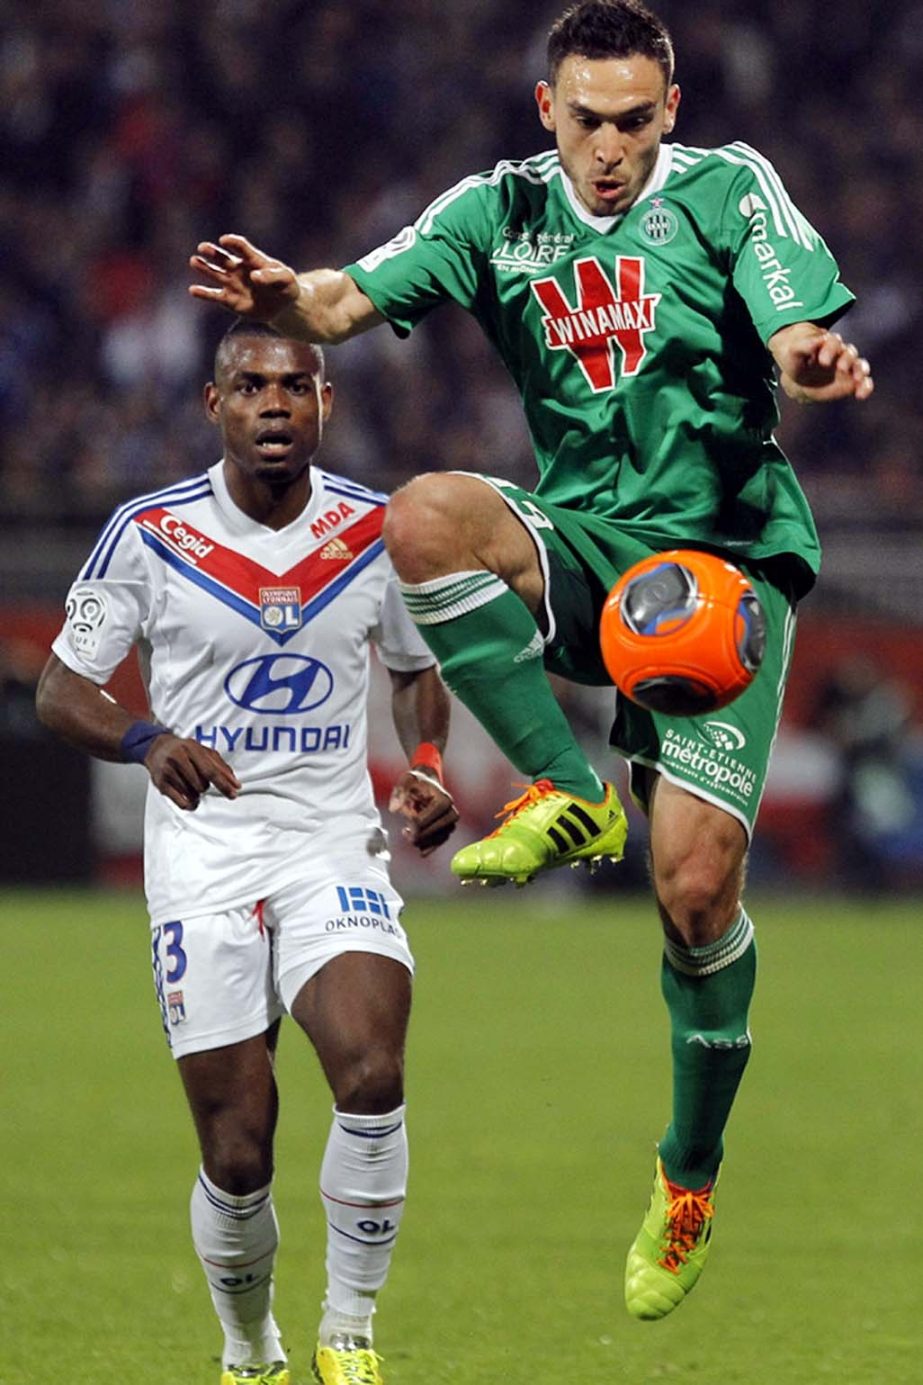 Saint-Etienne's Meviut Erding controls the ball during their French League One soccer match against Lyon in Lyon, central France on Sunday.